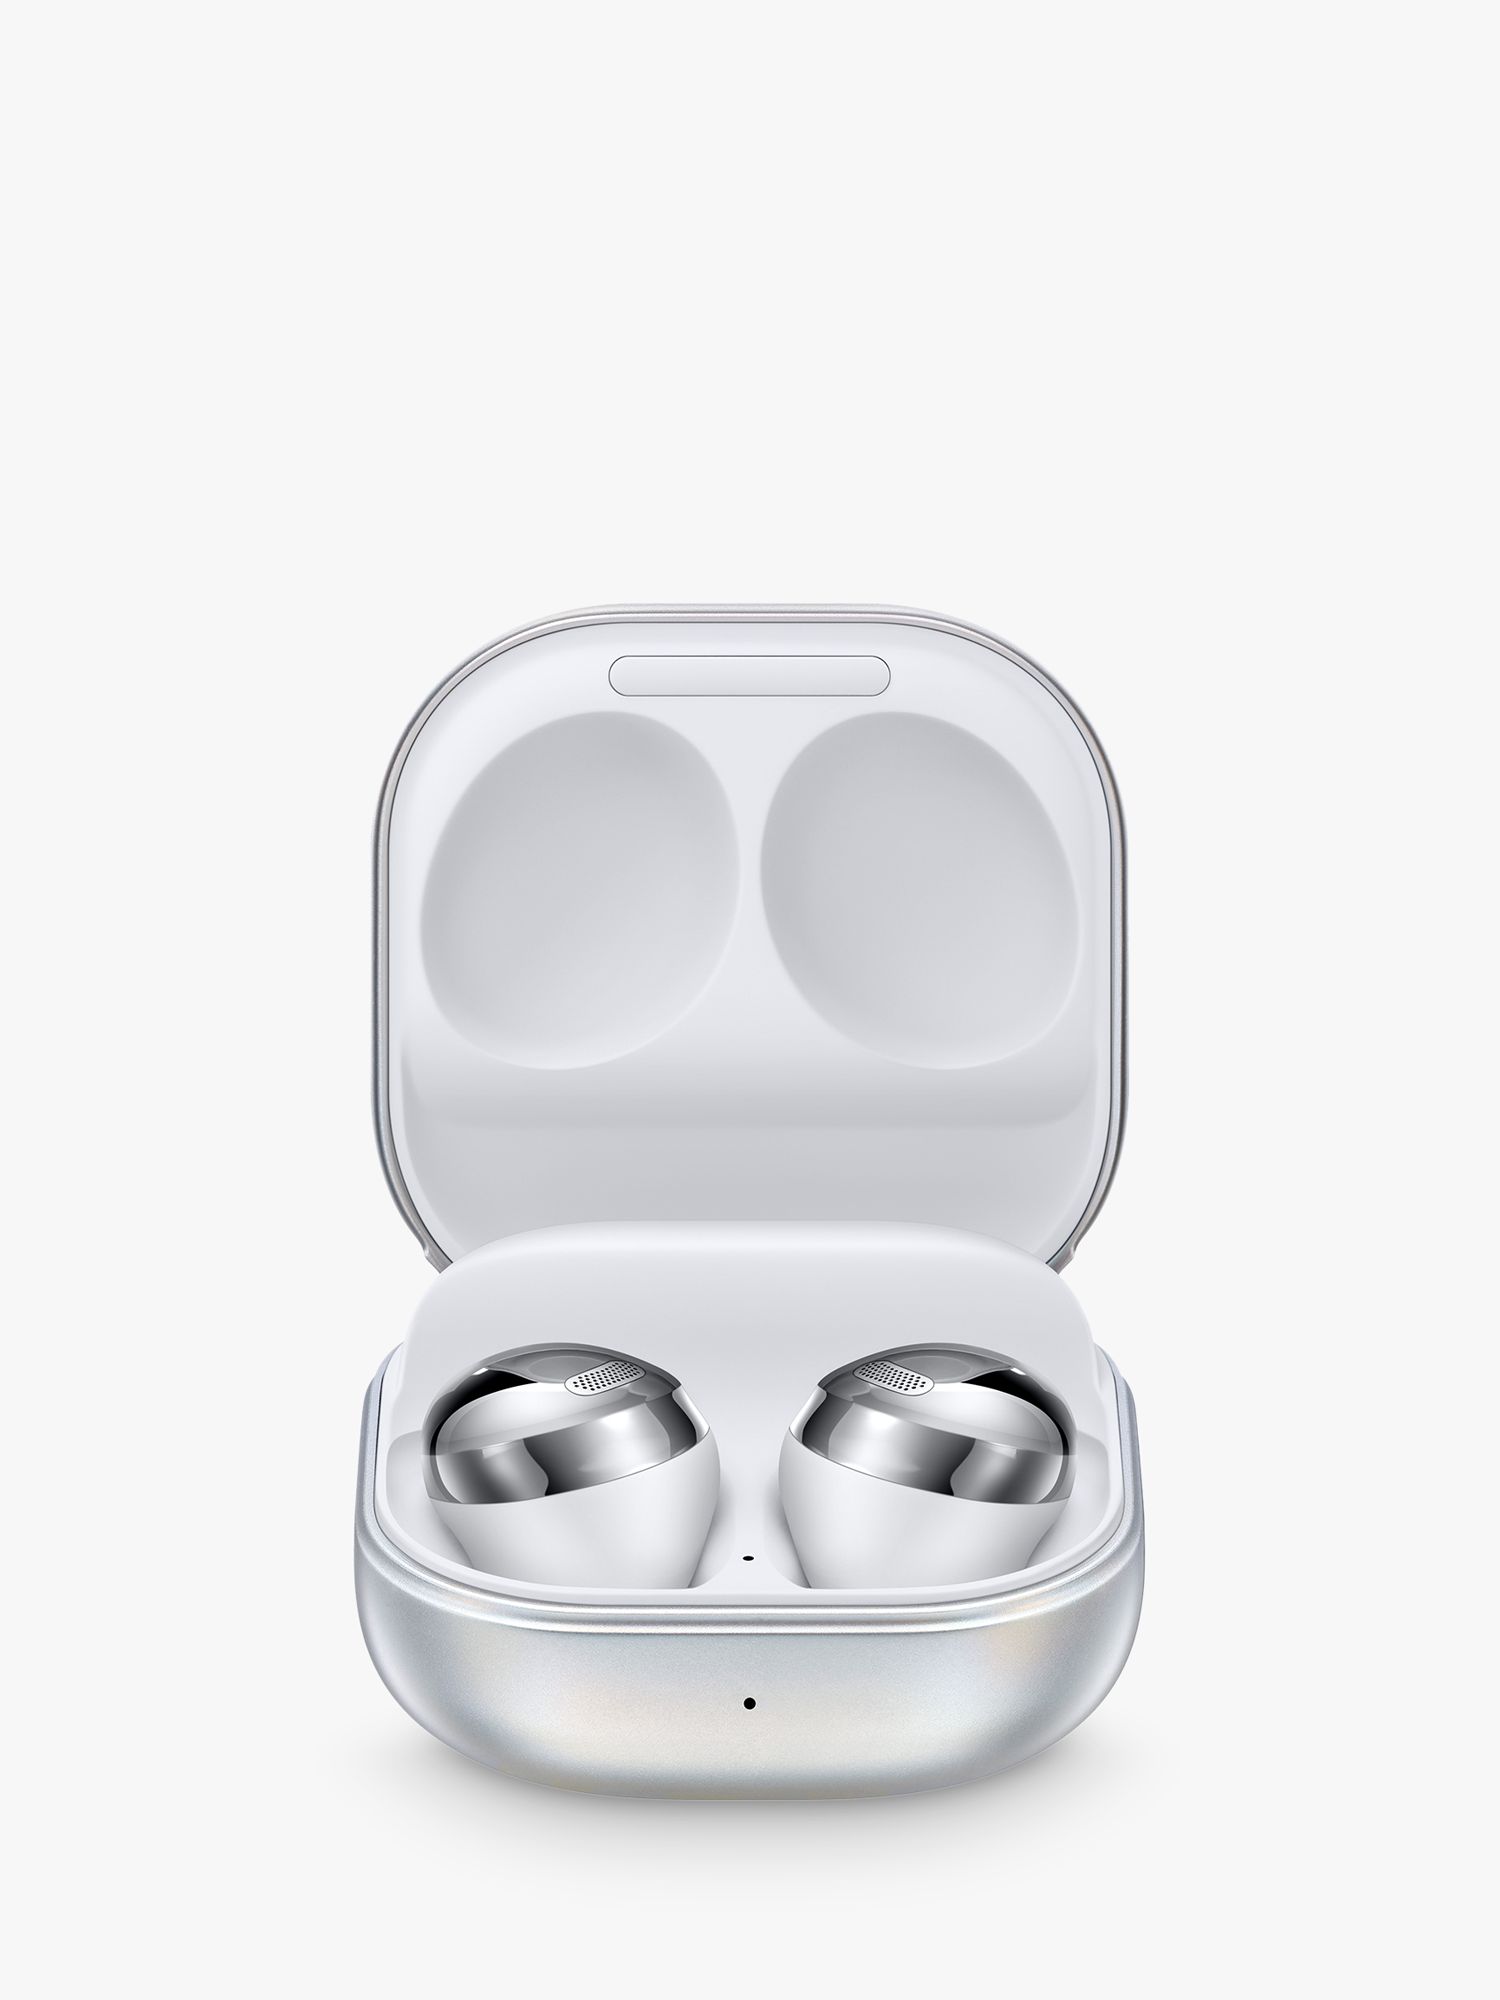 Samsung Galaxy Buds Pro True Wireless Earbuds with Intelligent Active Noise Control